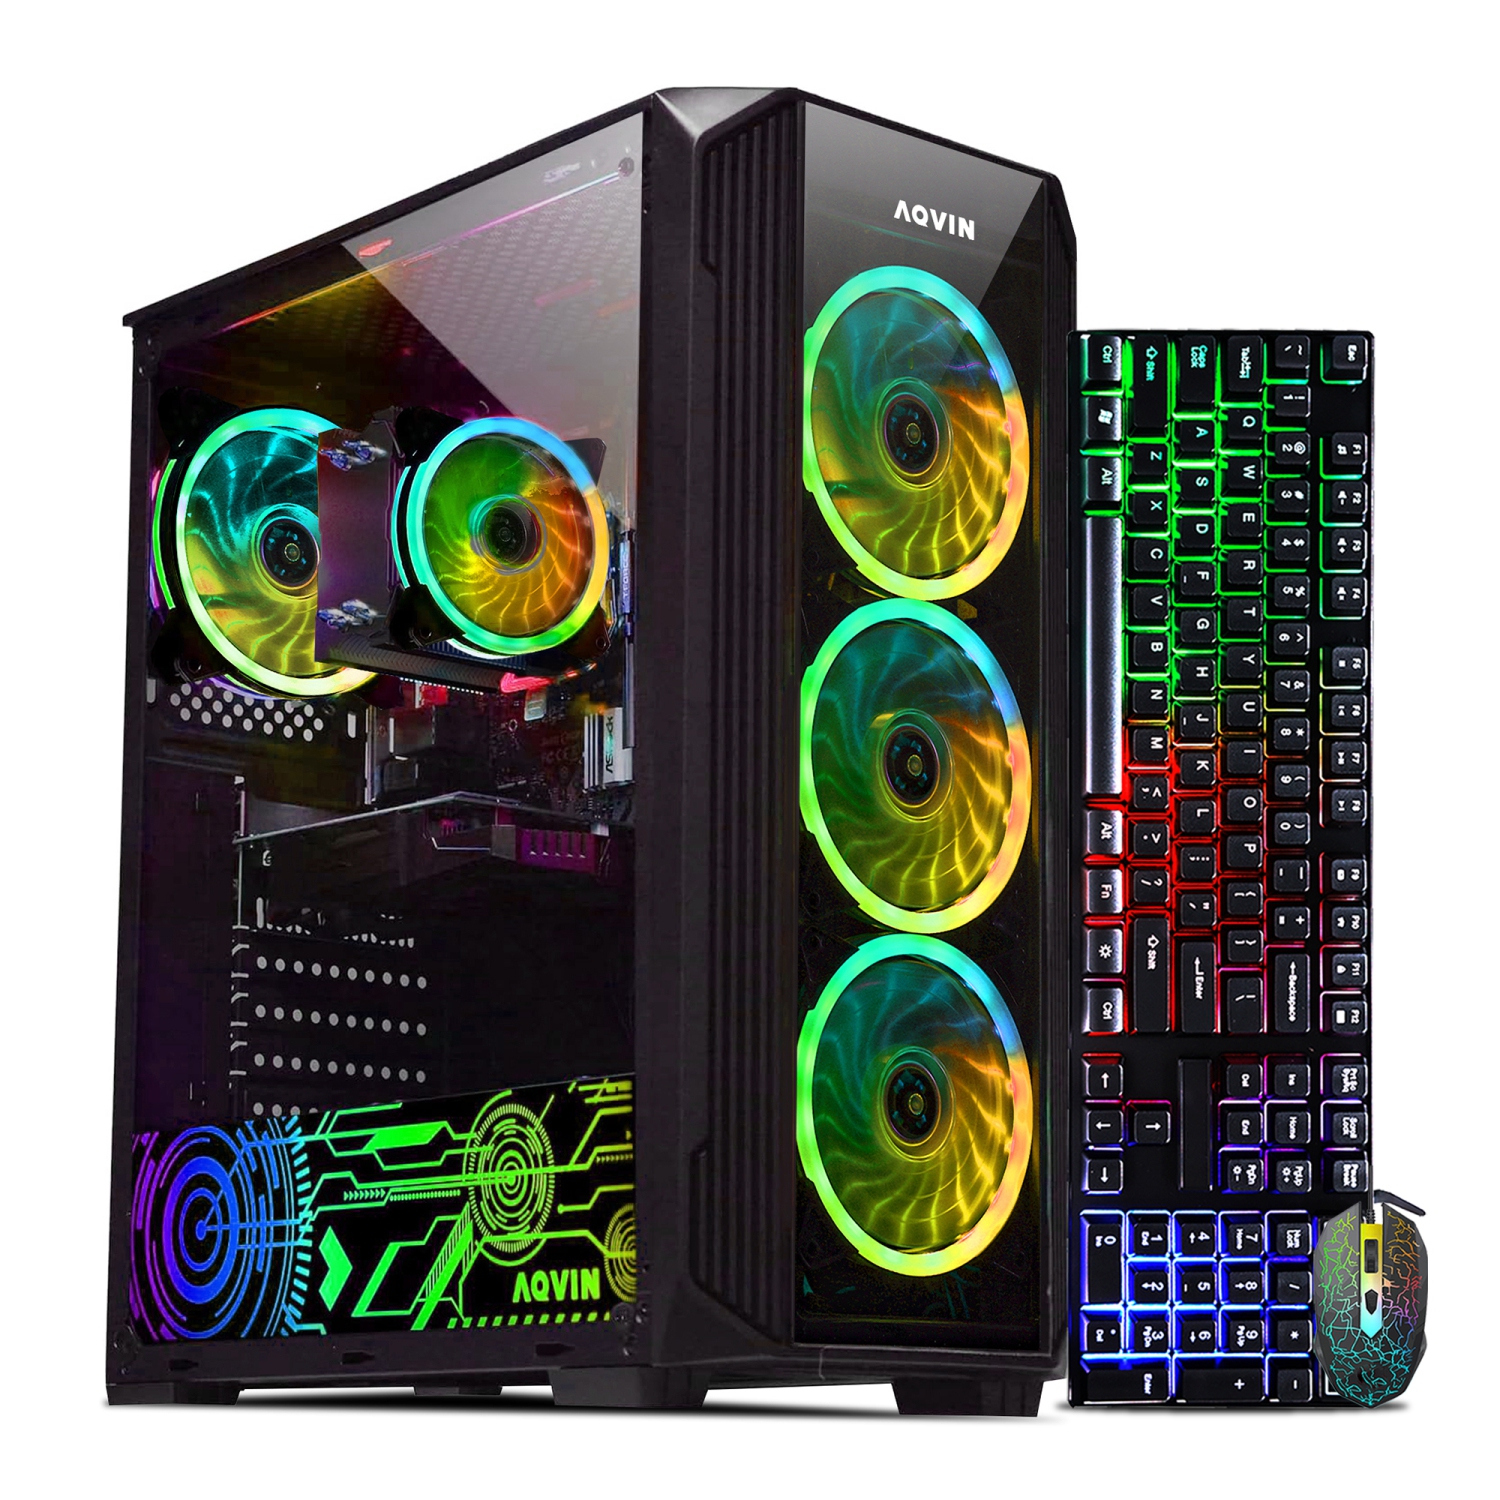 Refurbished (Excellent) - Gaming PC AQVIN ZForce Desktop Computer - RGB (Intel Core i7/ 2TB SSD (fast boot)/ 32GB DDR4 RAM/ GeForce RTX 3060 12GB/ Windows 10 Pro) Only at Best Buy